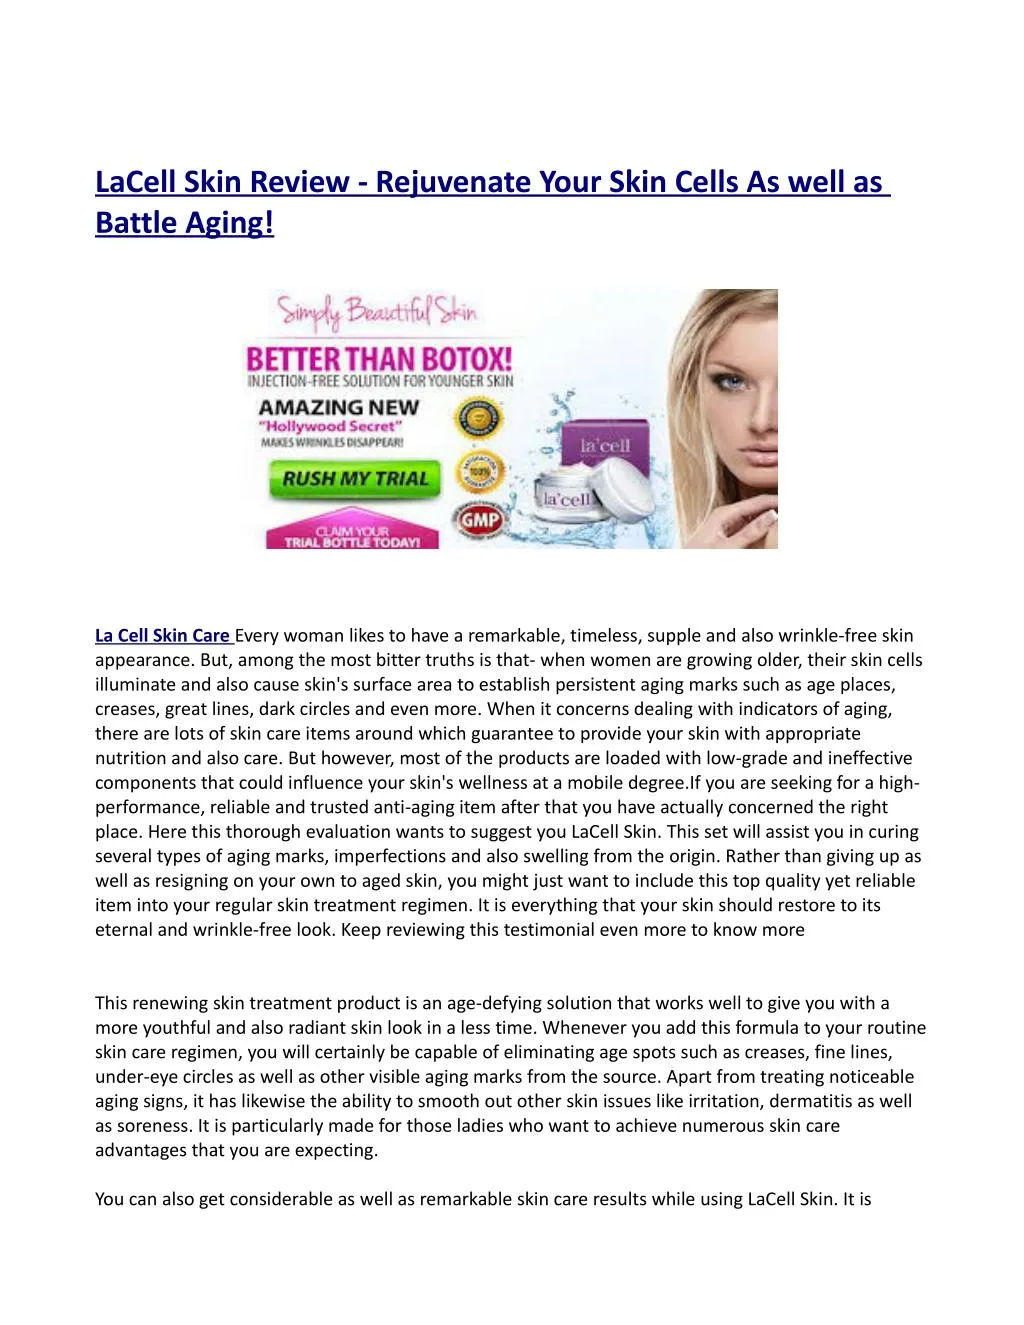 lacell skin review rejuvenate your skin cells